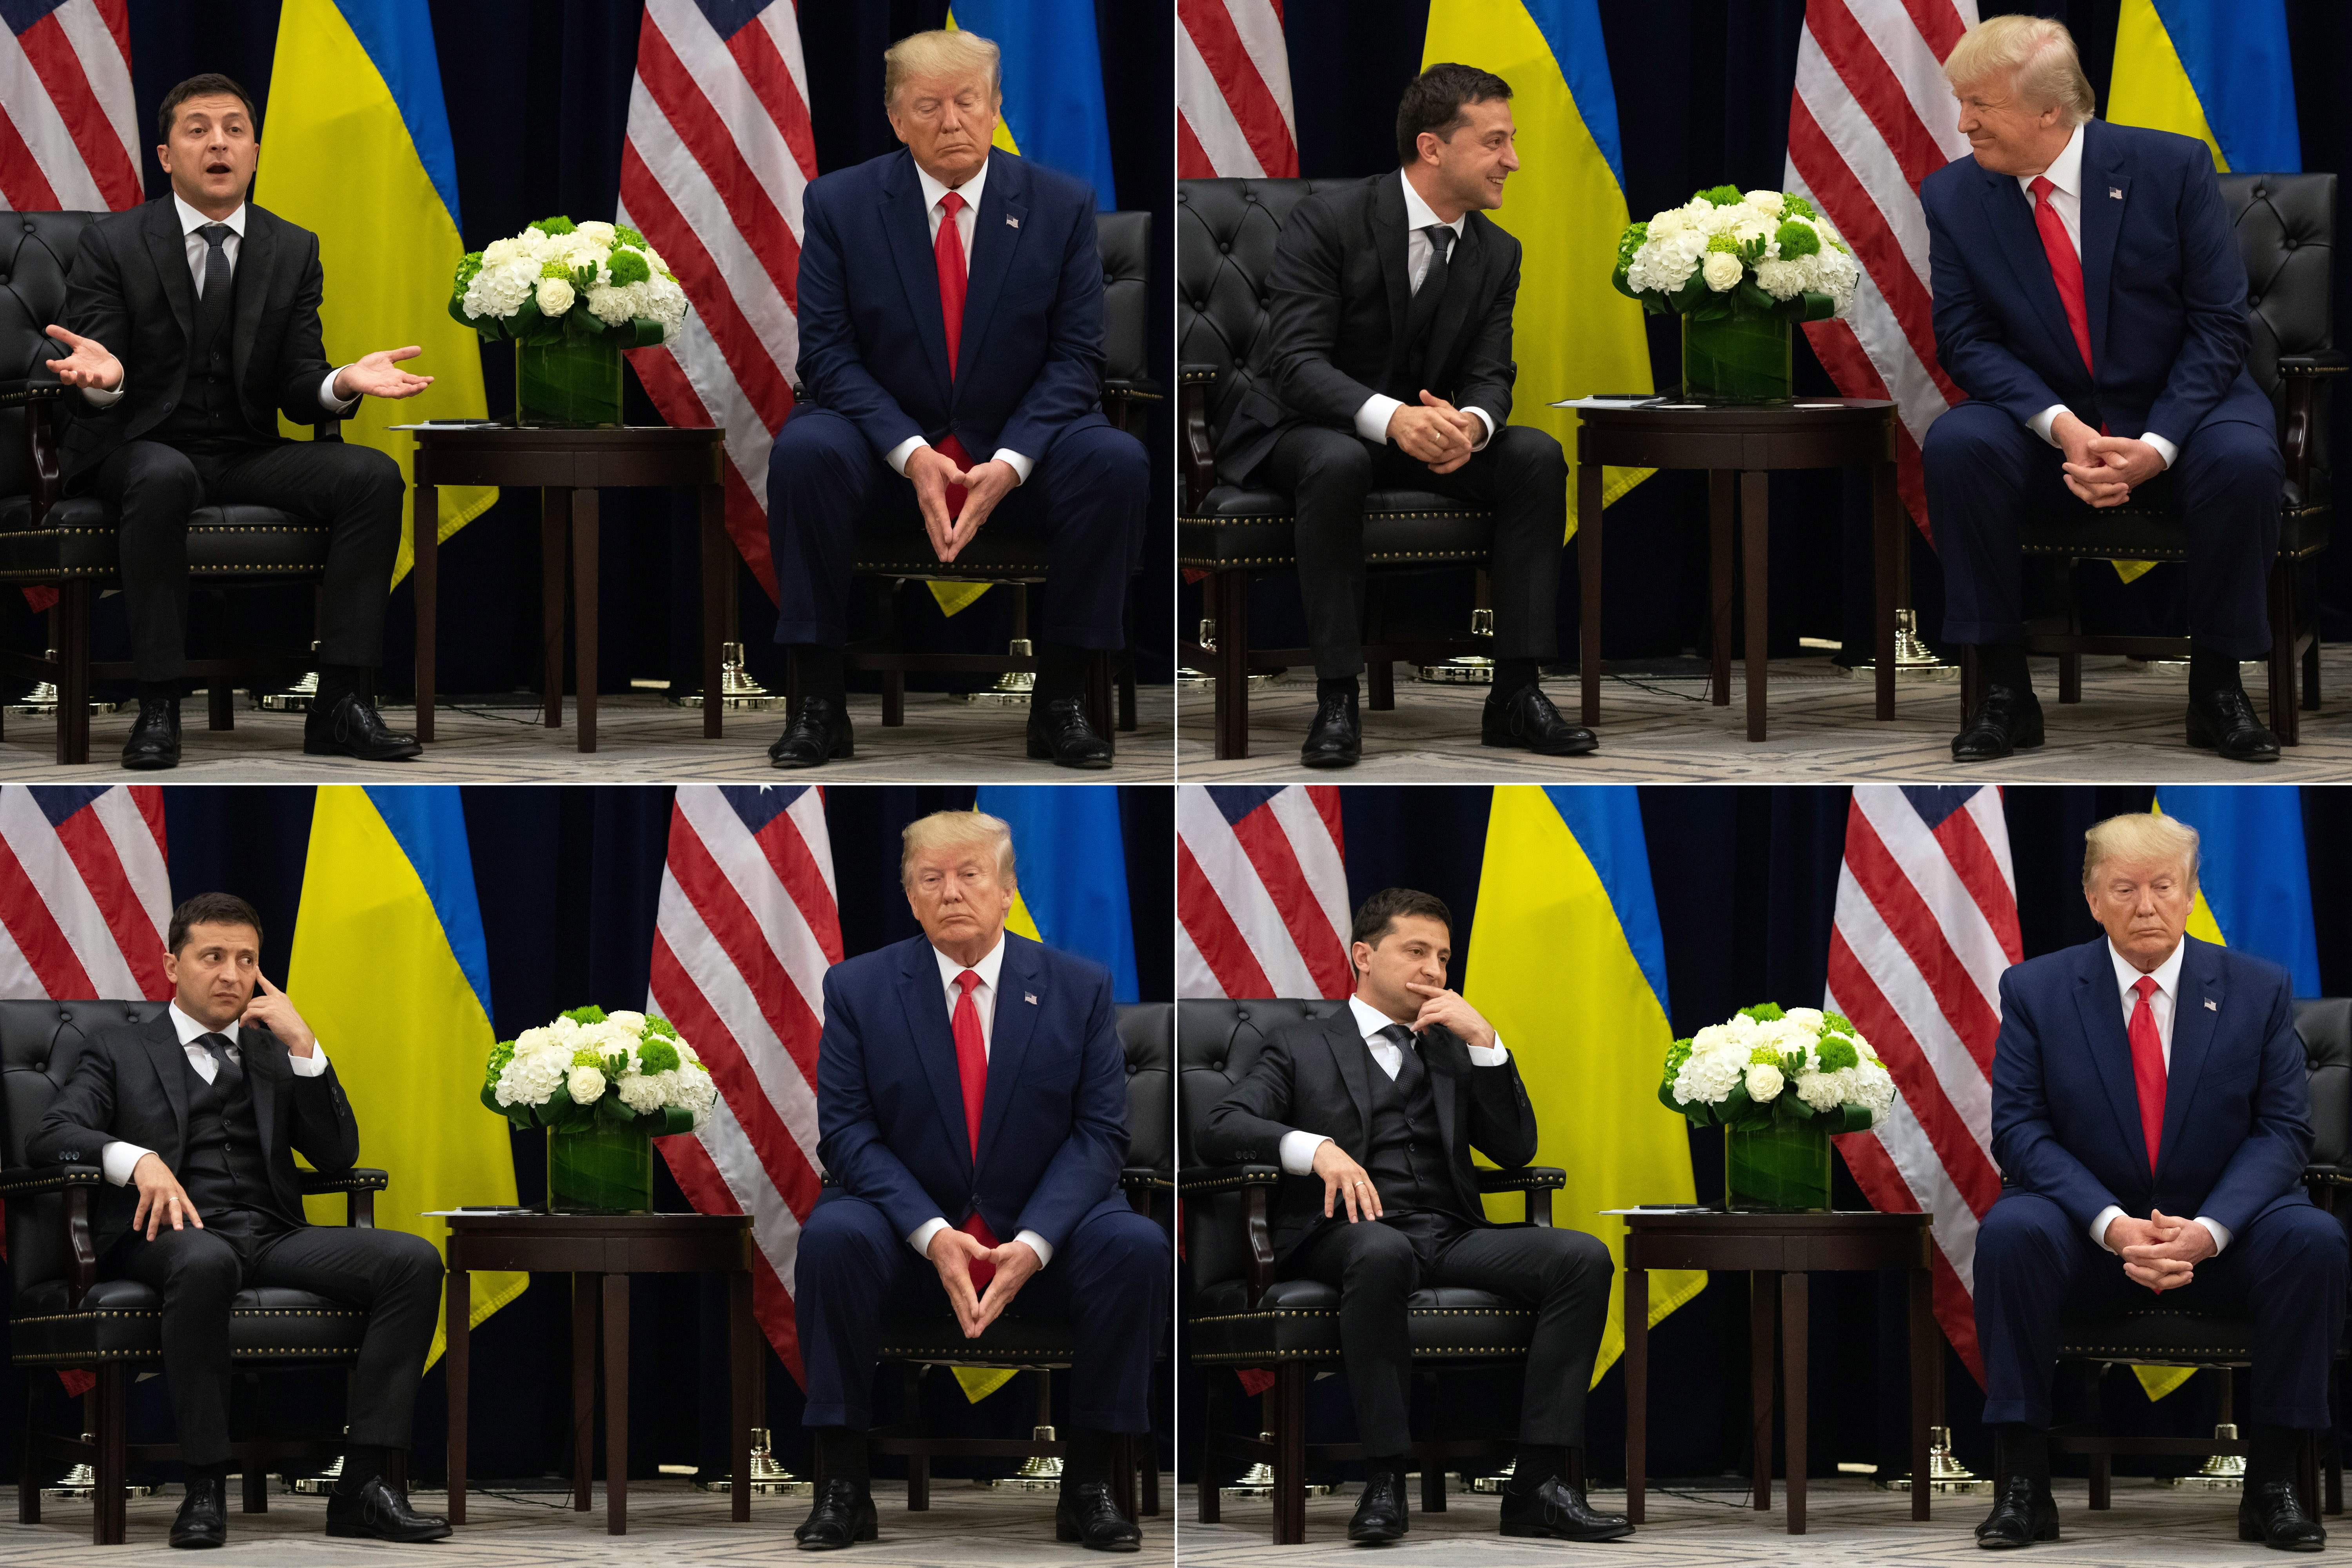 Four photos of Trump and Zelensky sitting next to each other and talking, with their countries' flags behind them.